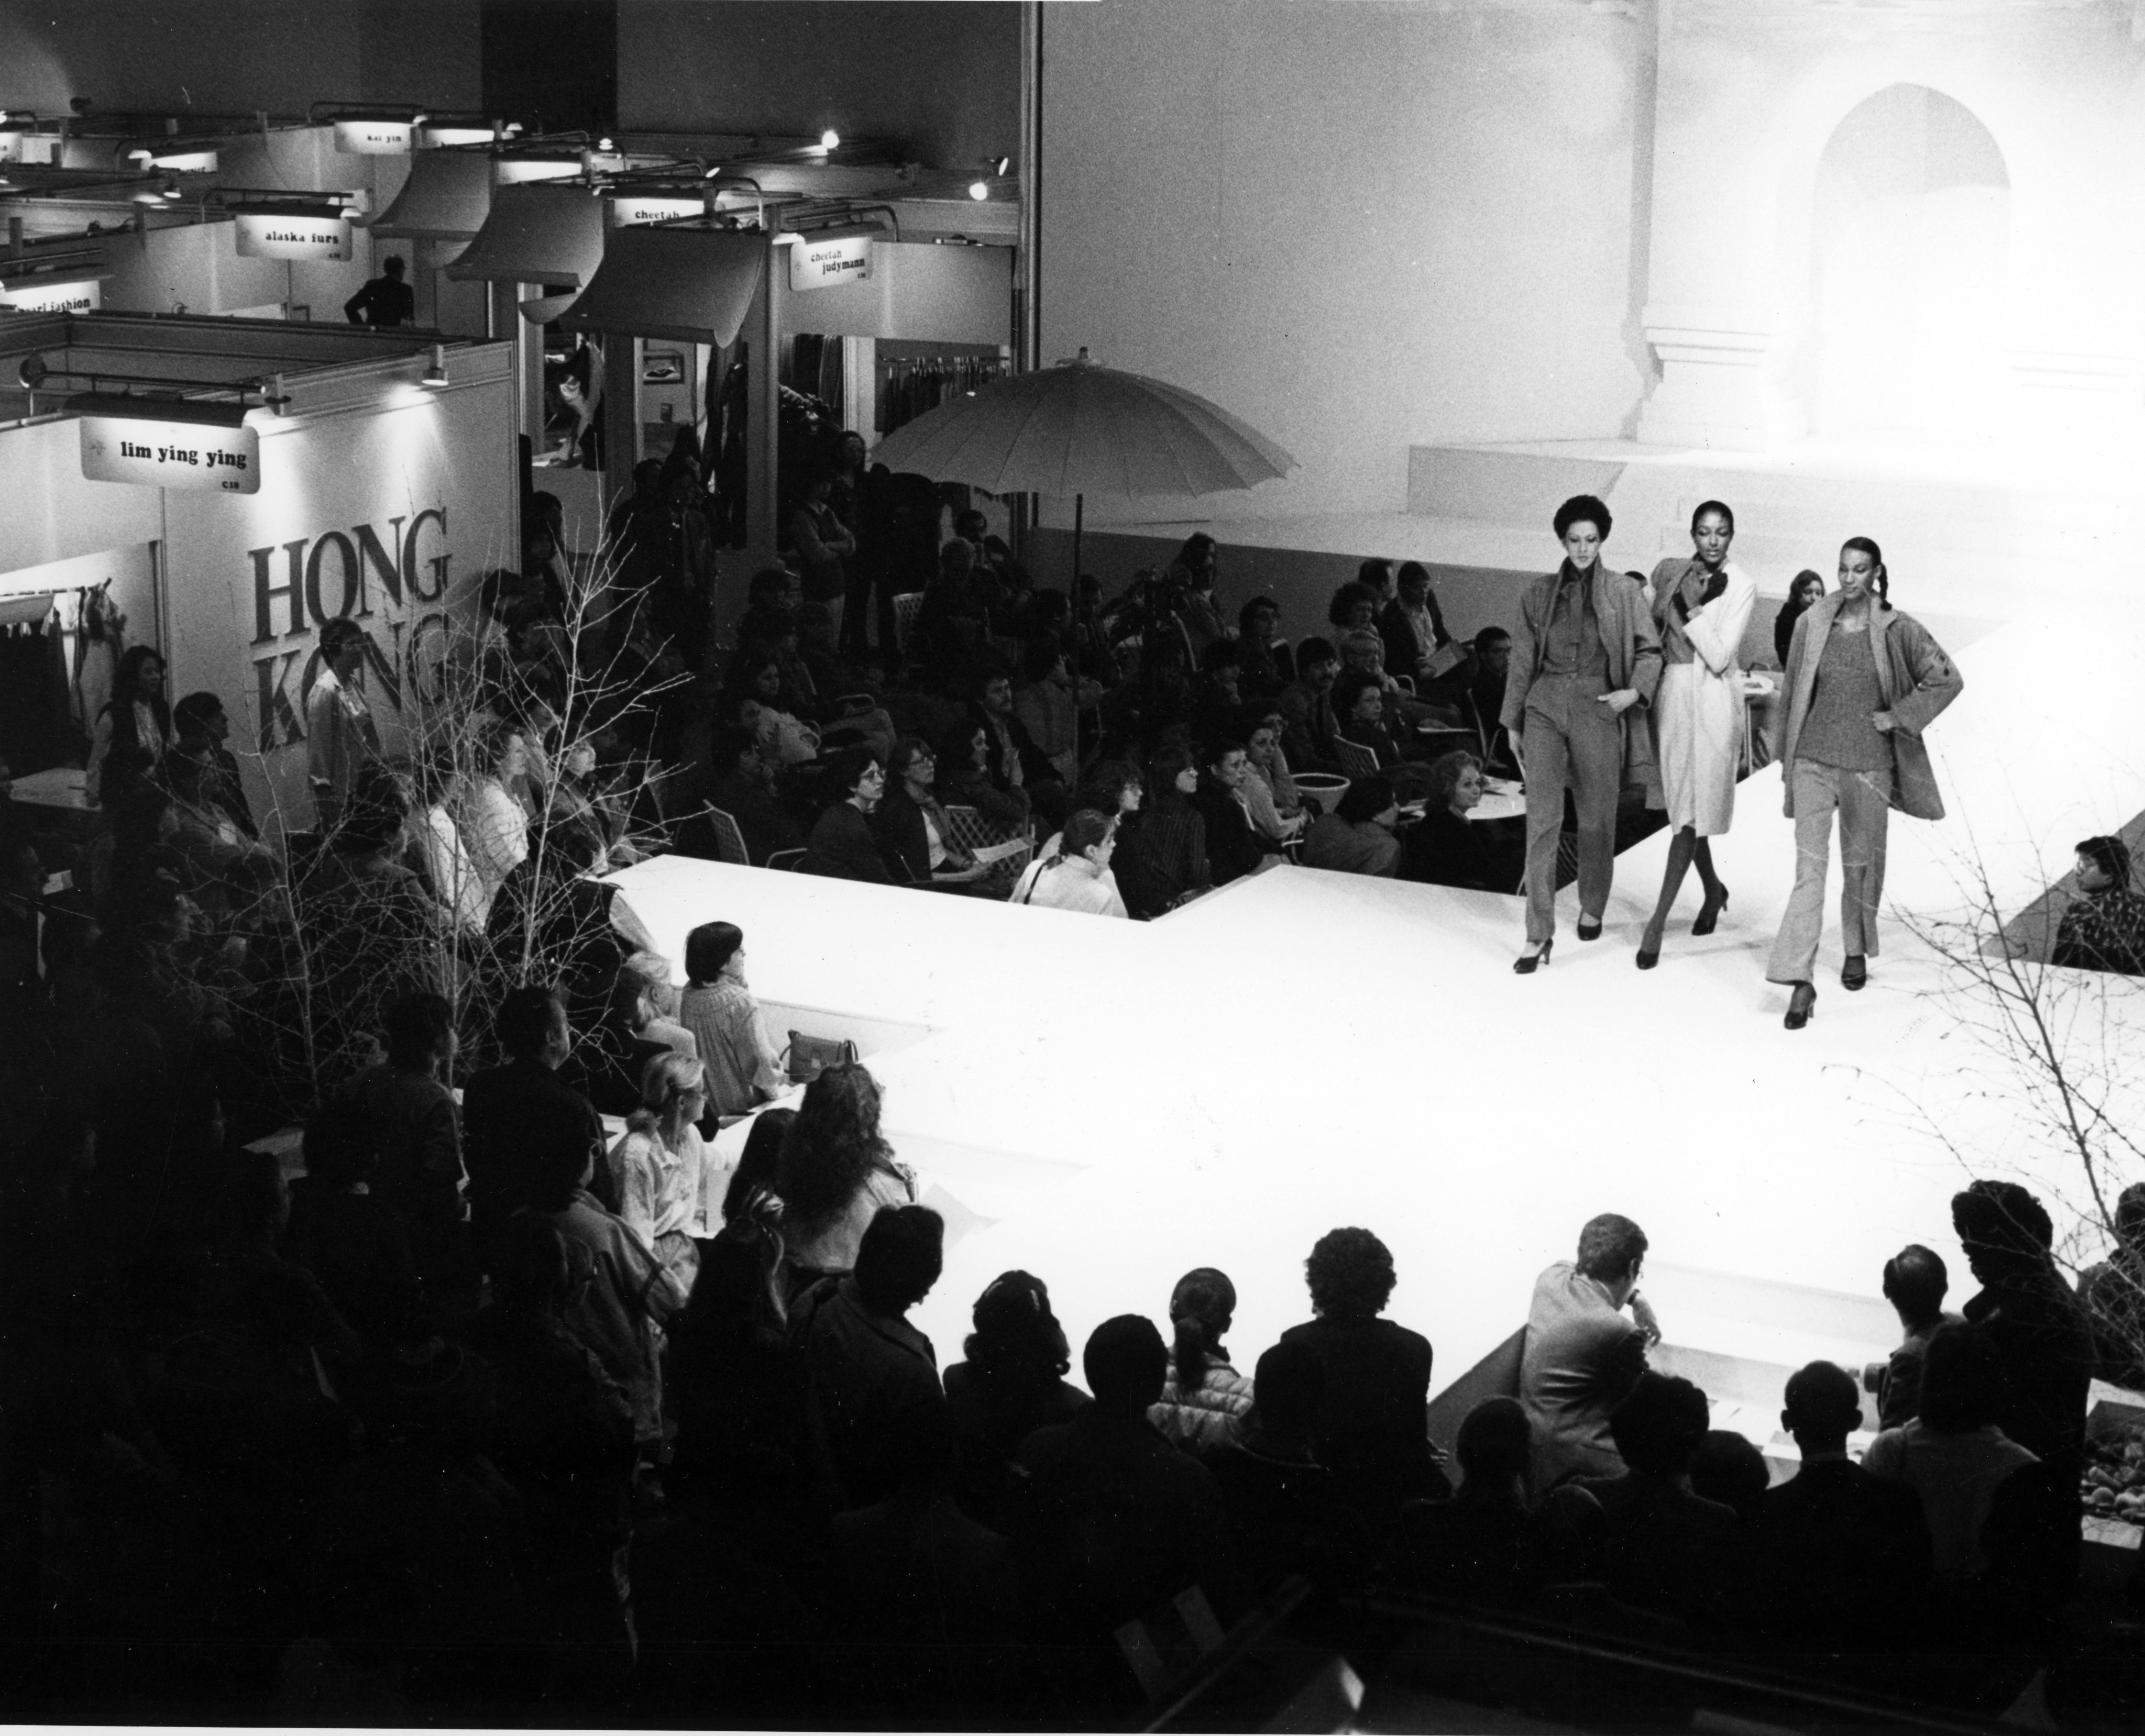 When Hong Kong sent models and garment makers to Paris to put on a ready-to-wear show in 1981, French manufacturers expressed their dismay and tried to halt the show. The pret-a-porter show was a success.